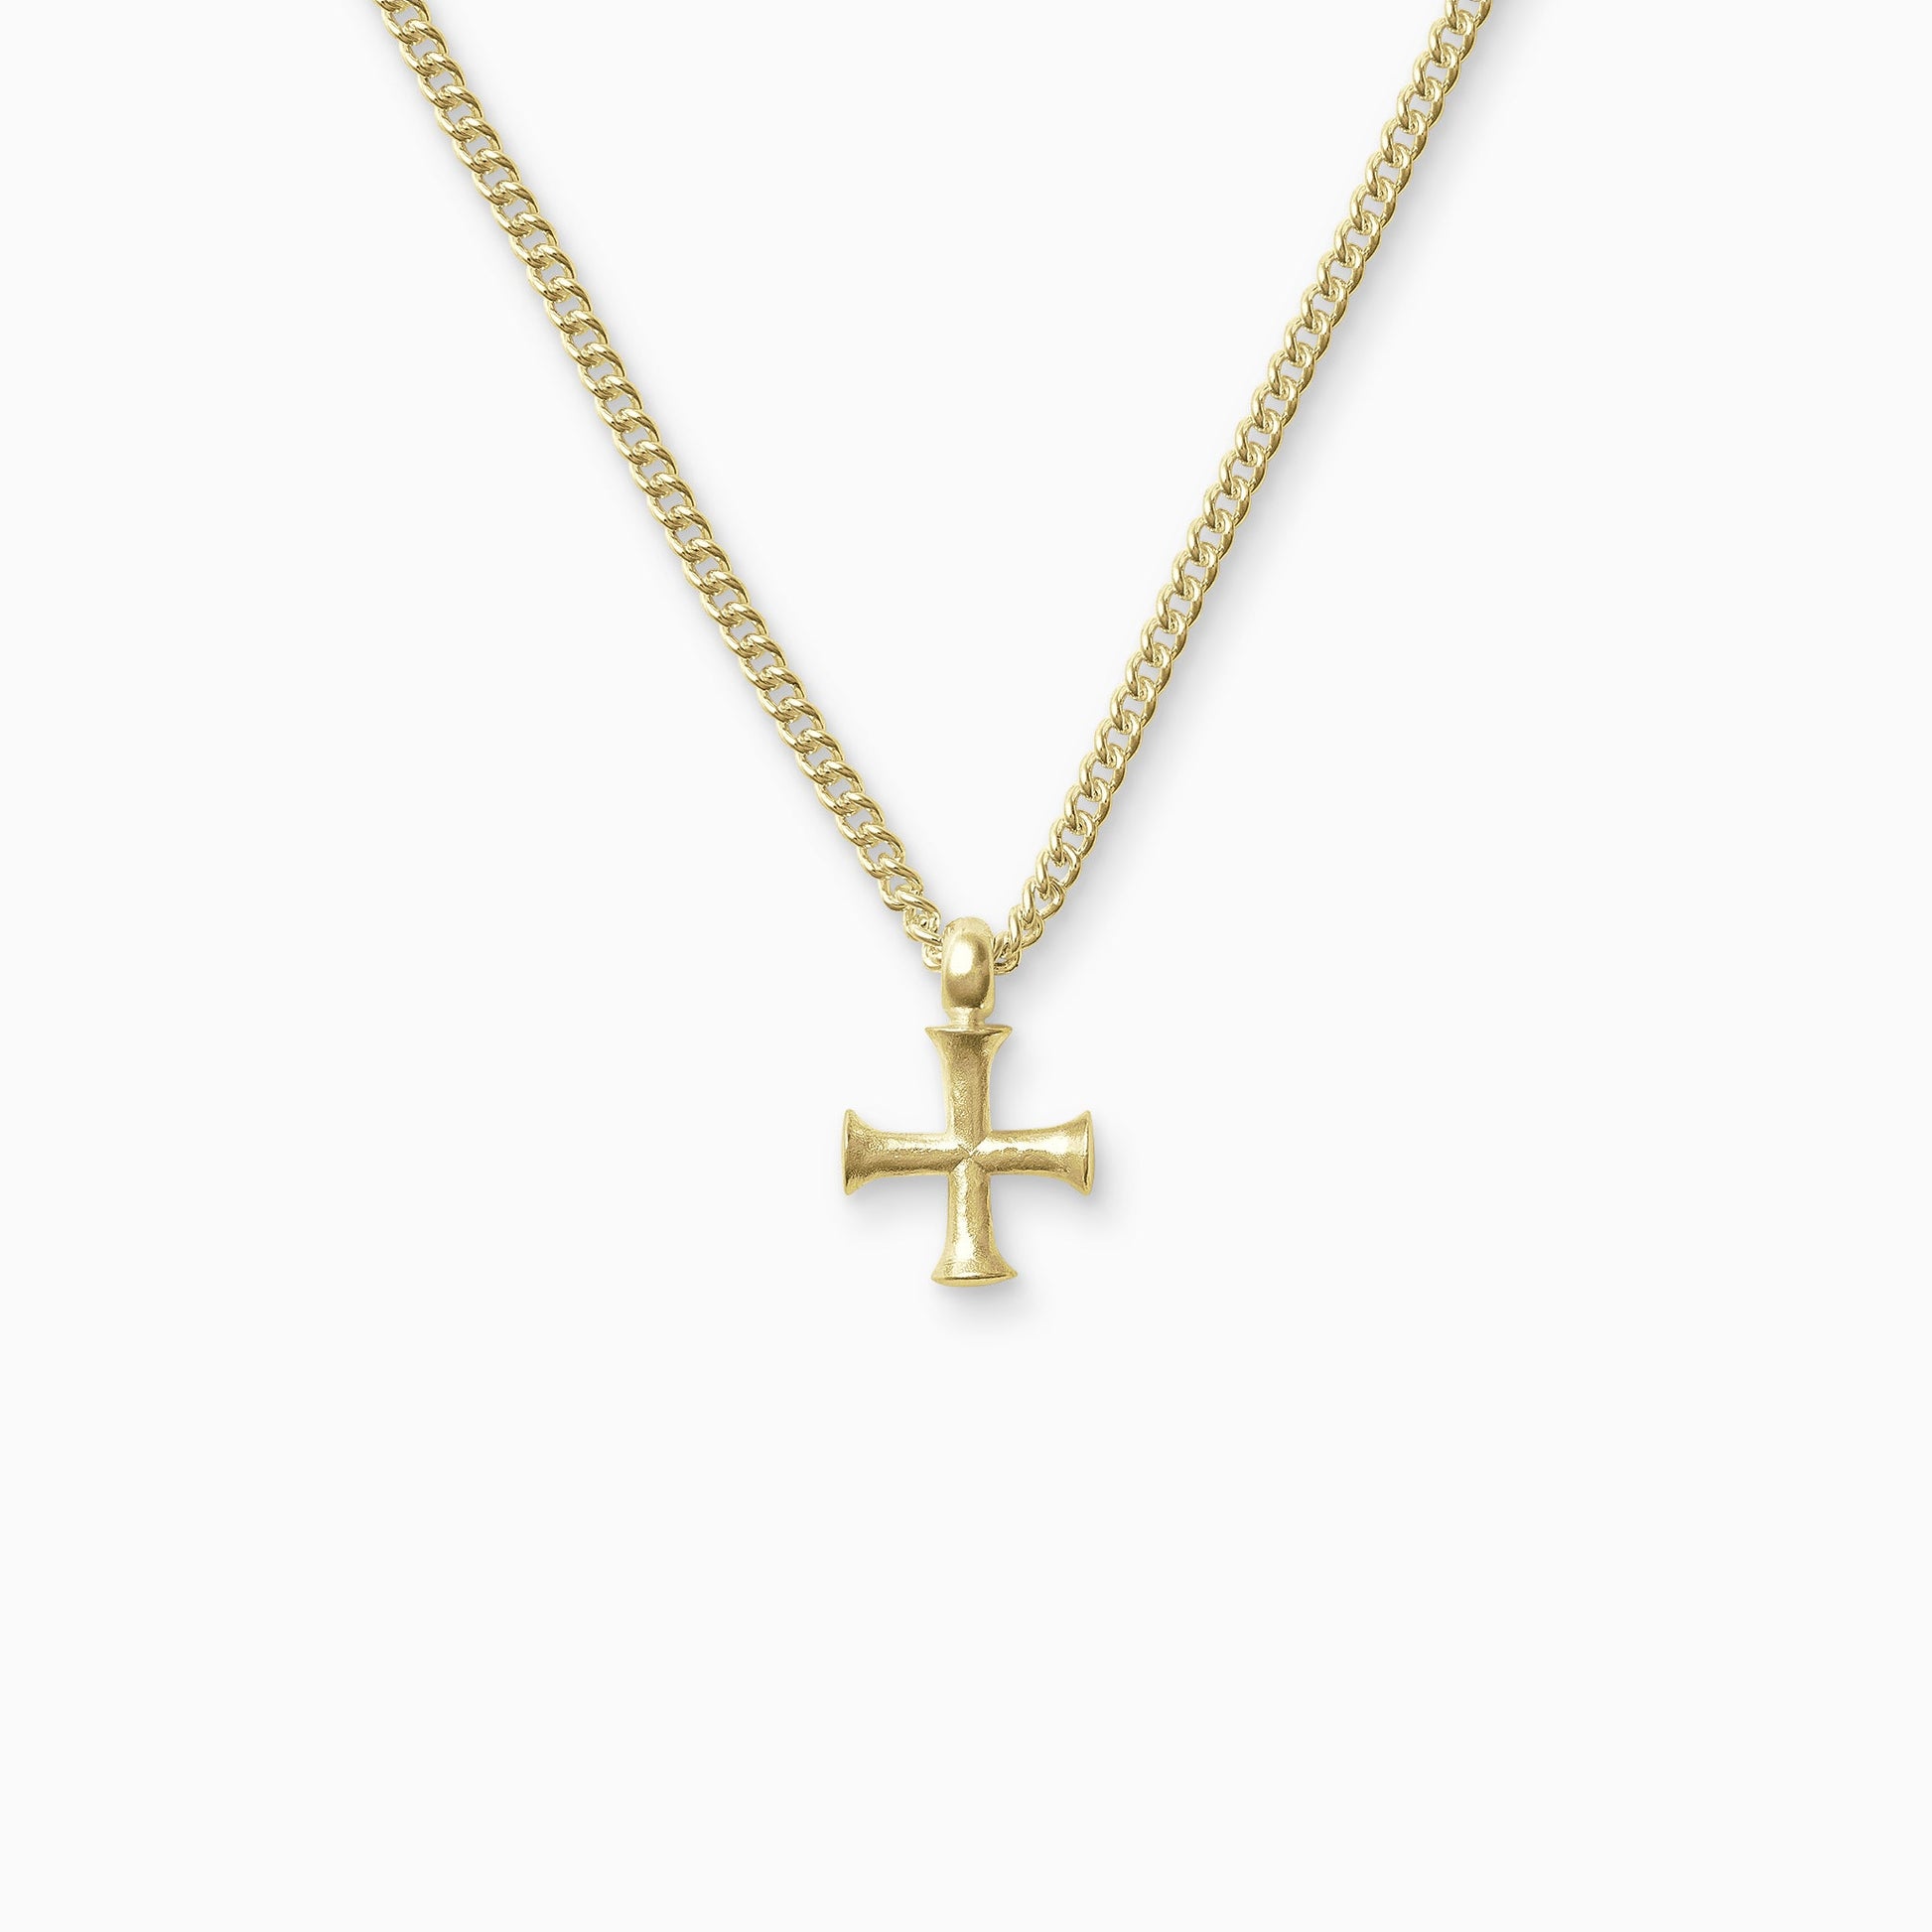 18ct Fairtrade yellow gold Byzantine cross, 21mm on a 55cm heavy curb chain. The cross has equal length arms with outward spreading ends.